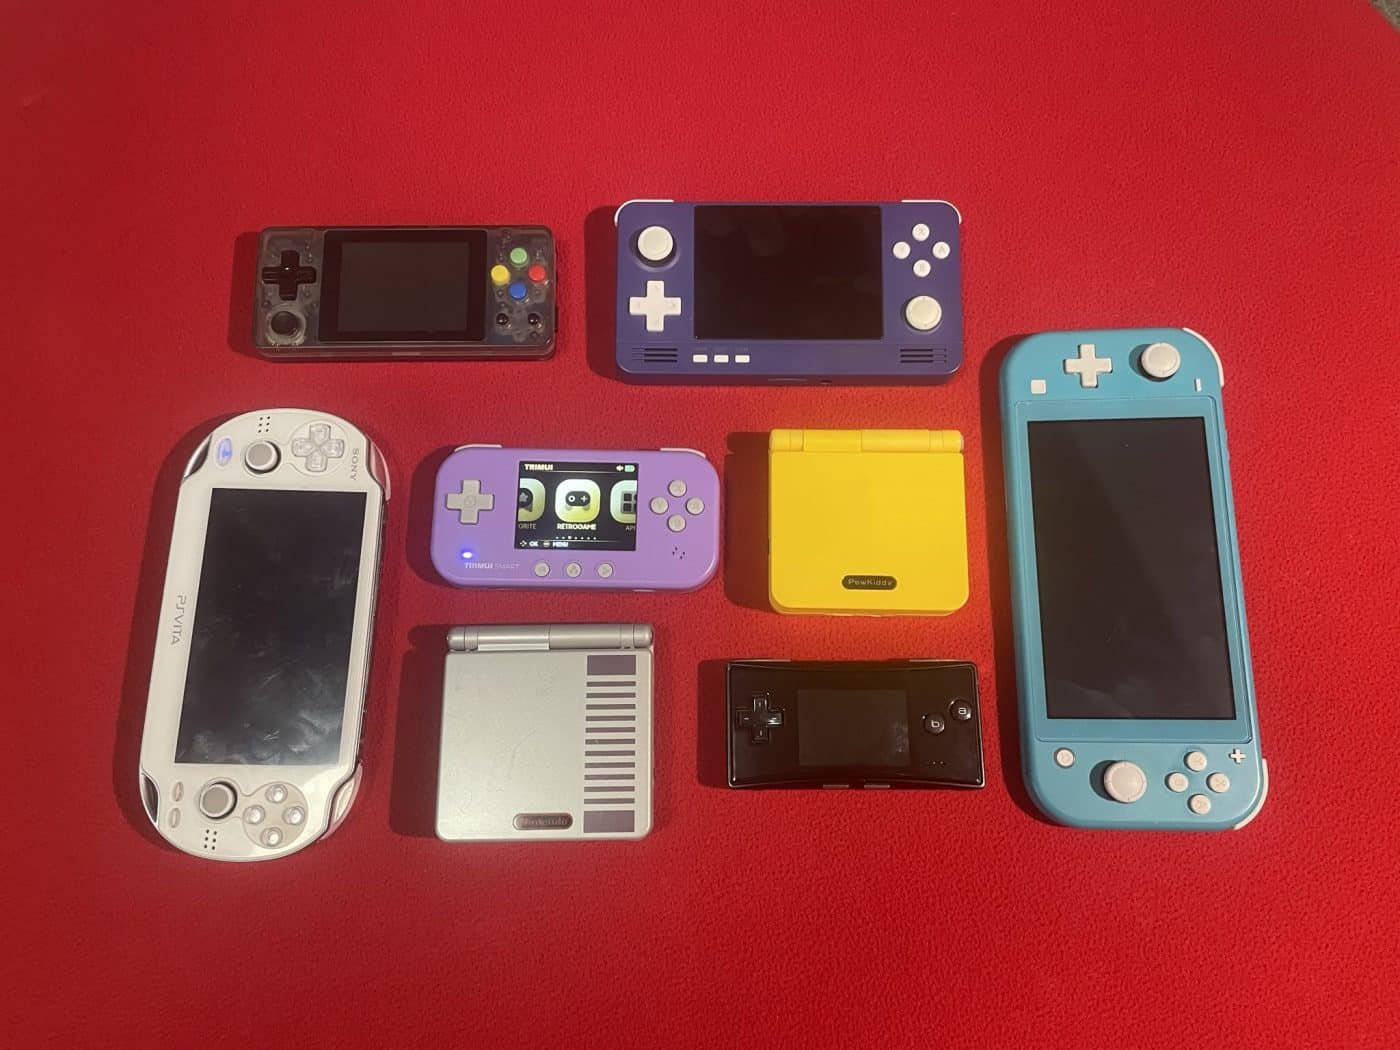 Trimui smart handheld emulation device compared to several other handhelds